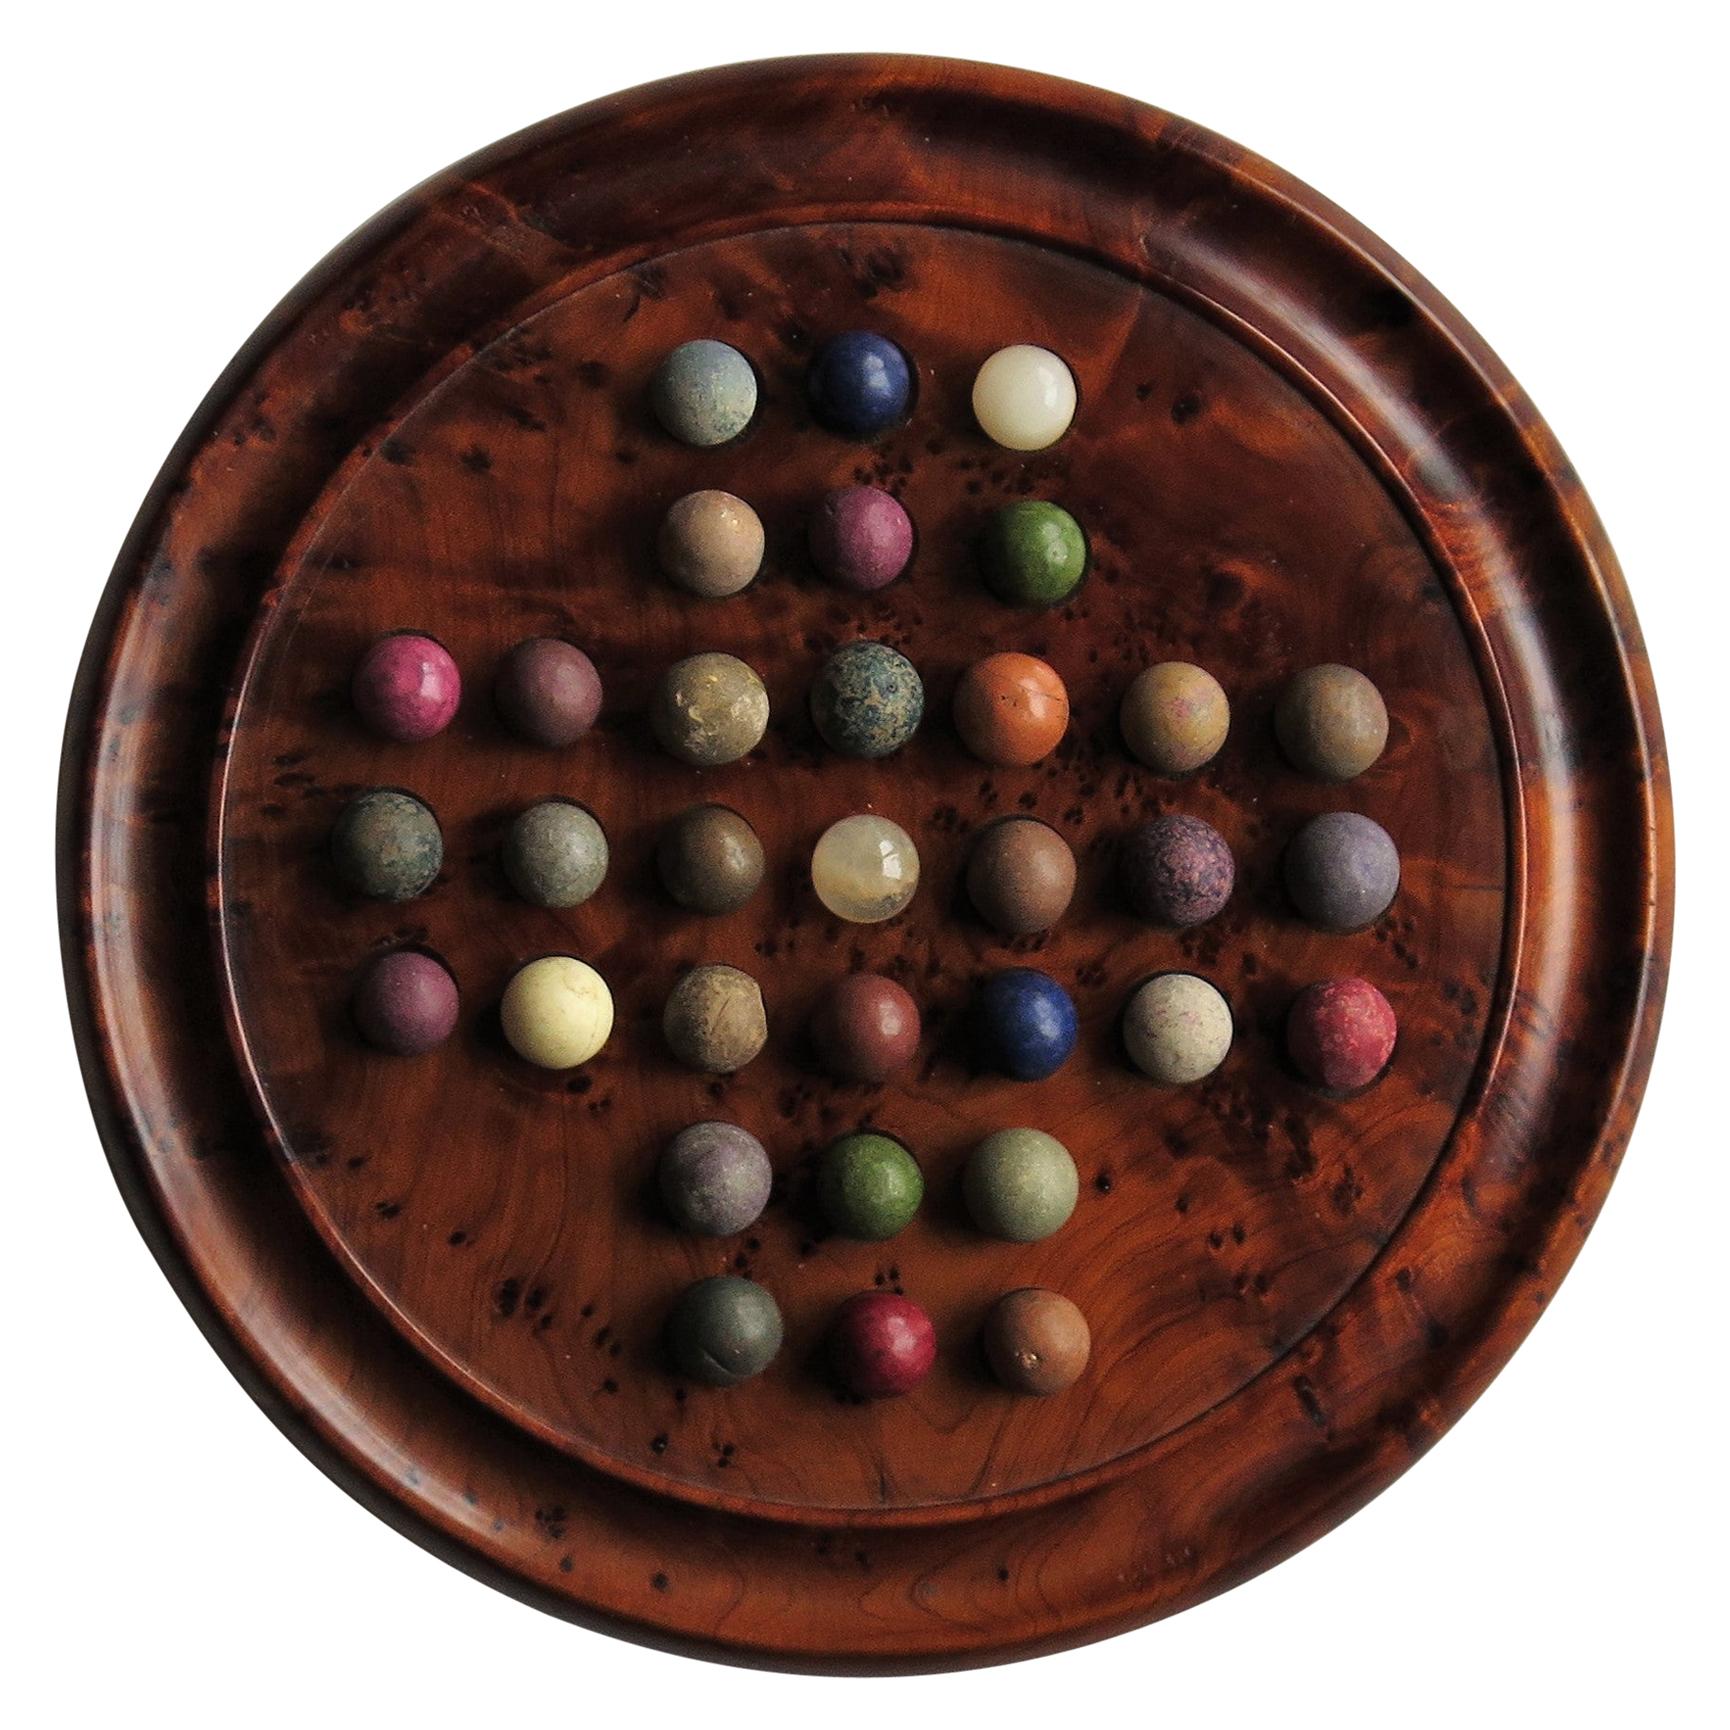 Marble Solitaire Board Game with 33 Early Handmade Stone Marbles, circa 1900